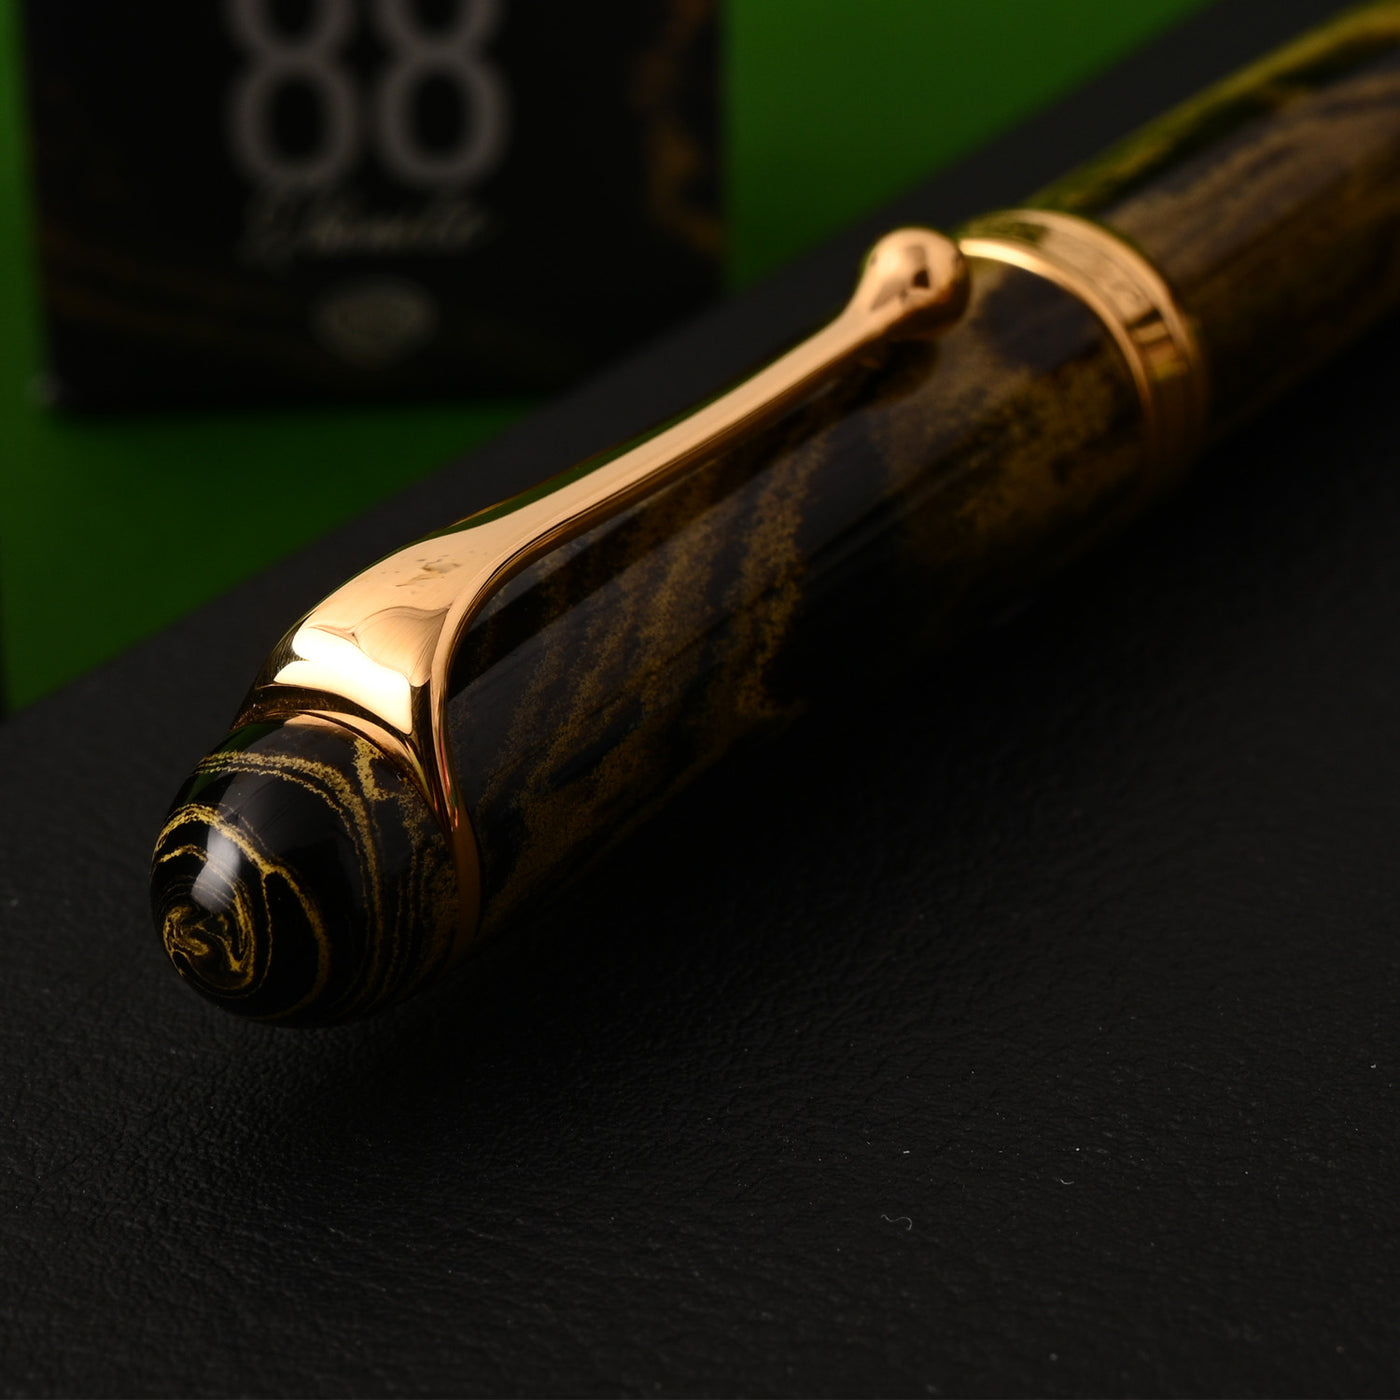 Aurora 88 Ebonite Fountain Pen - Marbled Yellow GT (Limited Edition) 10